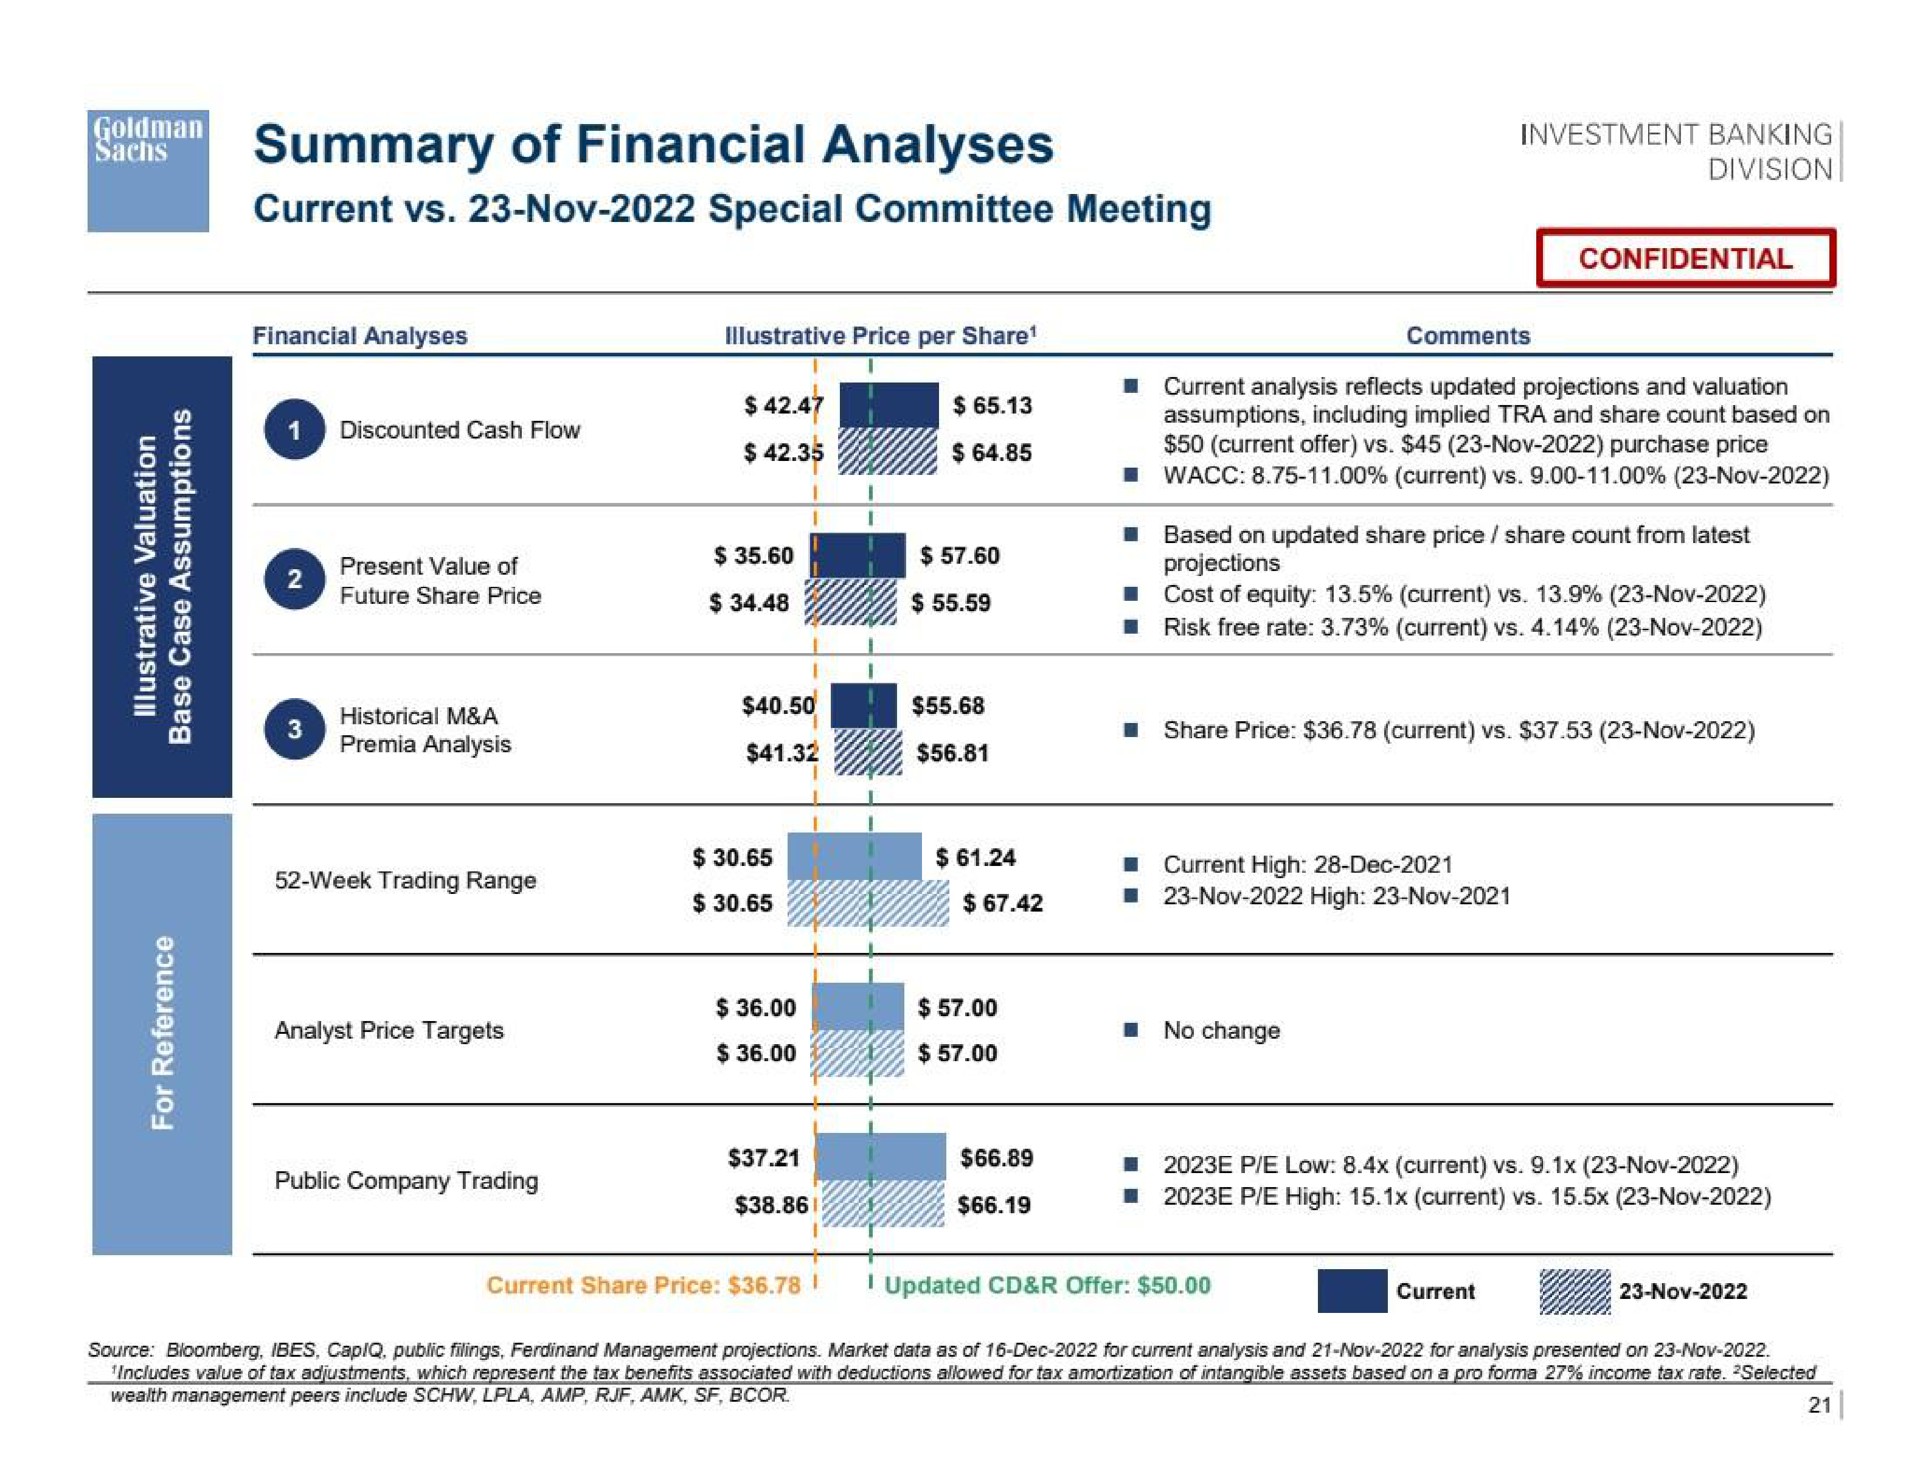 summary of financial analyses investment | Goldman Sachs